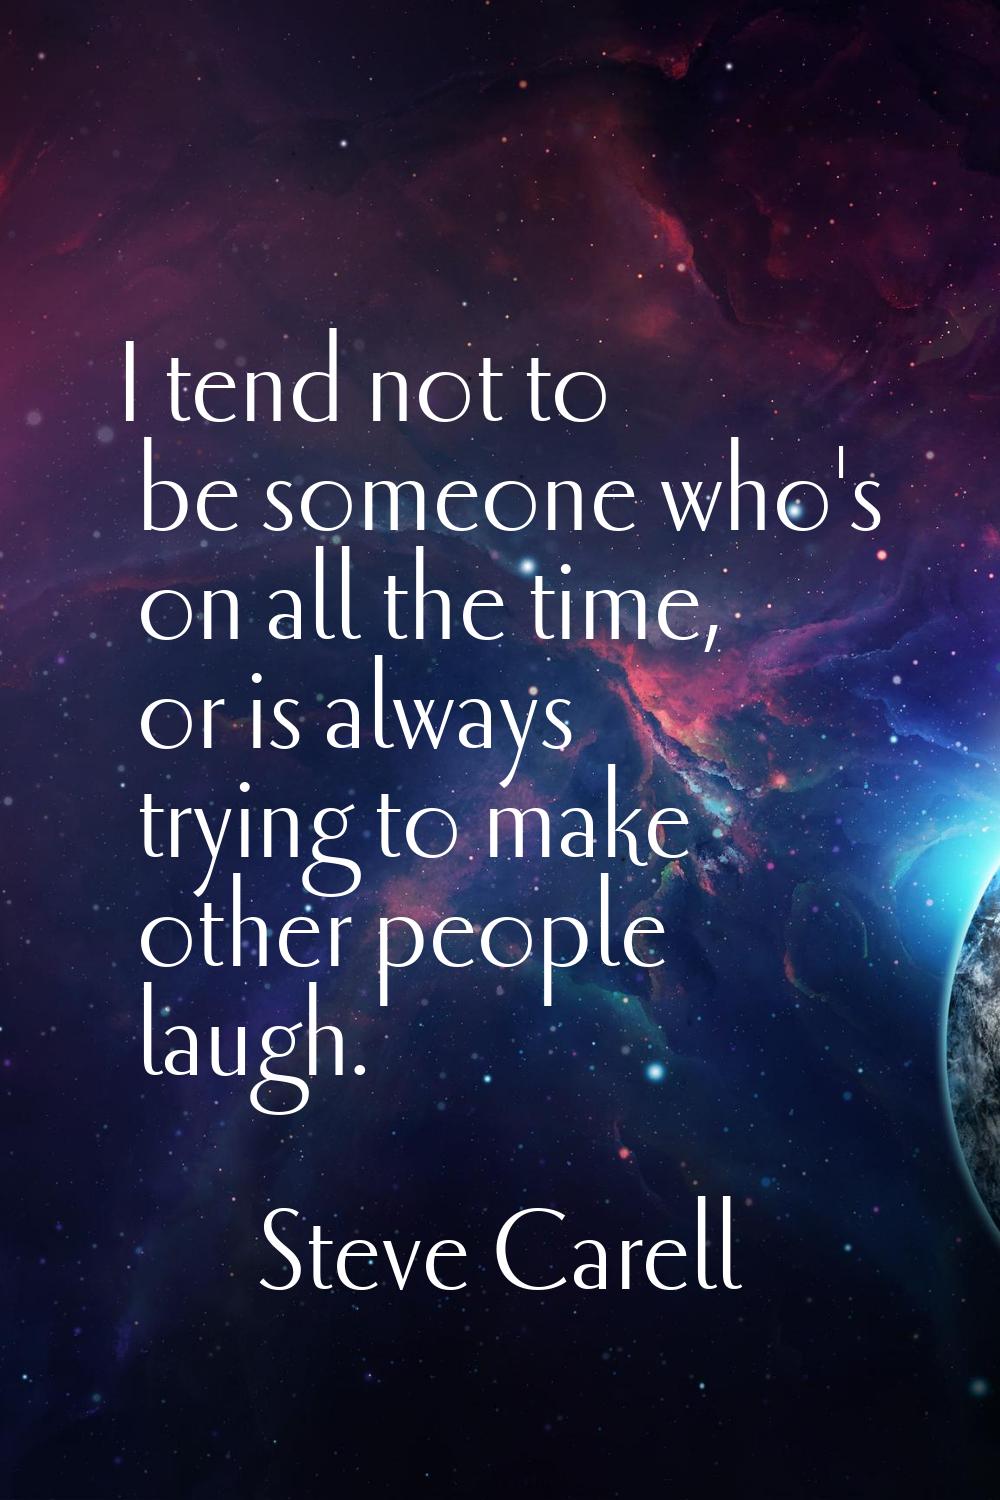 I tend not to be someone who's on all the time, or is always trying to make other people laugh.